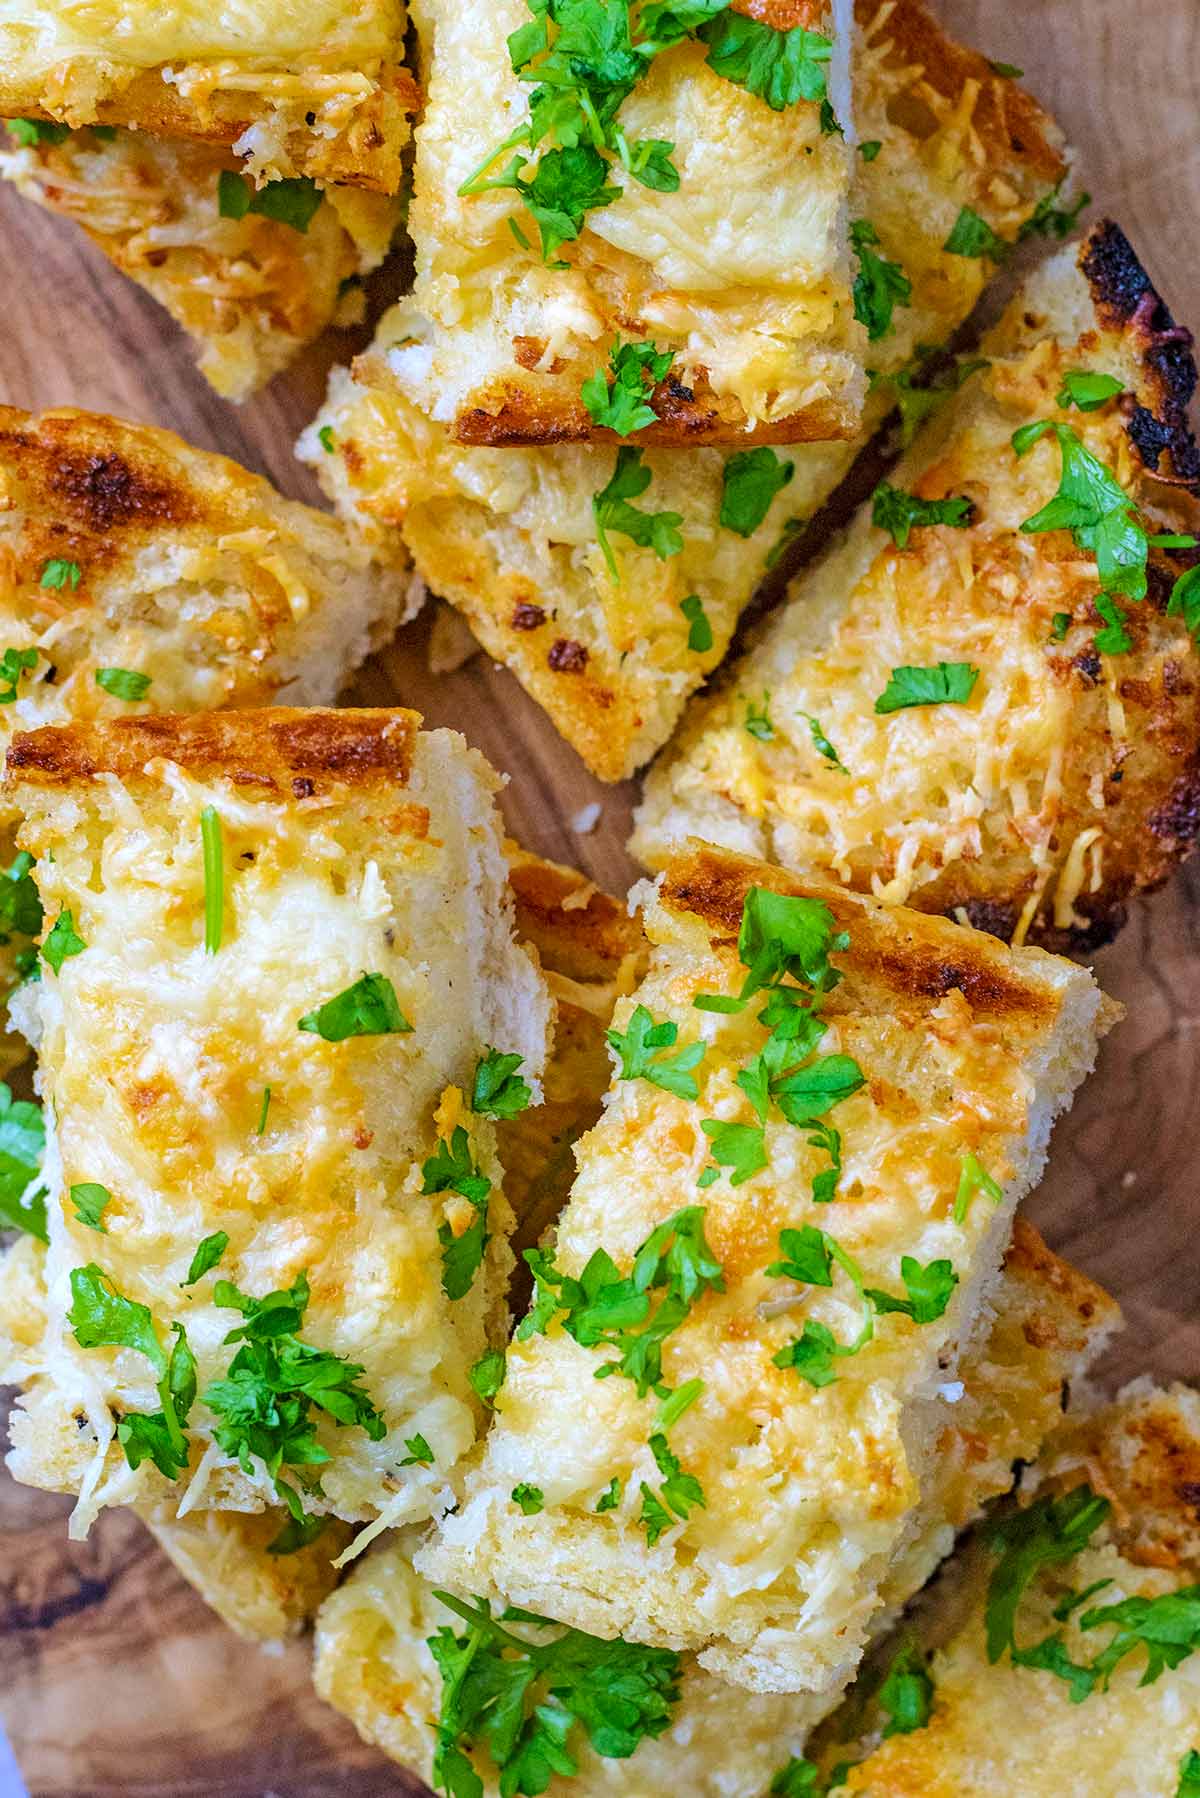 Slices of cheesy garlic bread with chopped herbs sprinkled over them.